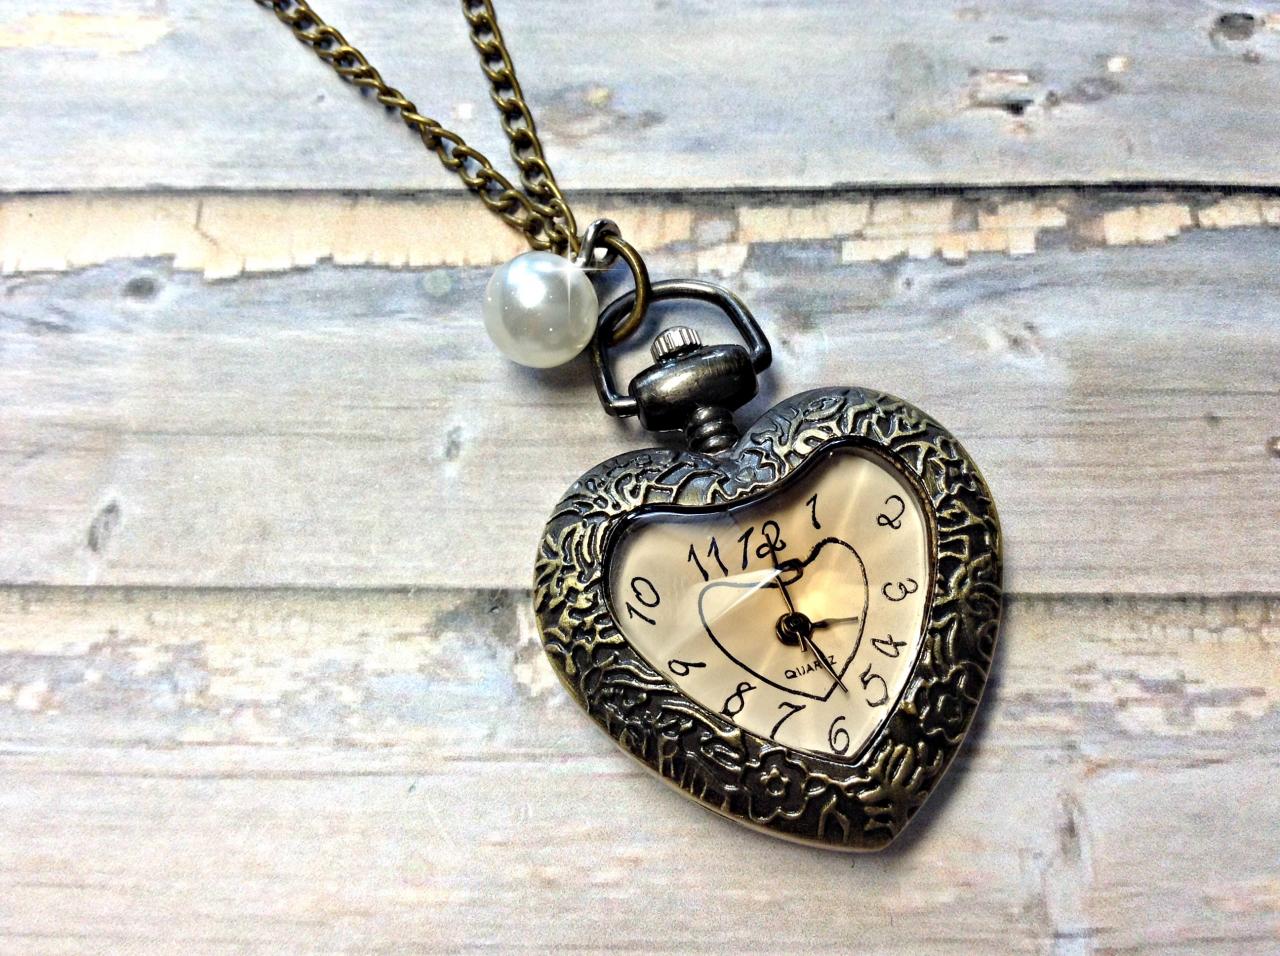 Handmade Vintage Heart Pocket Watch Necklace With Pearl Pendant